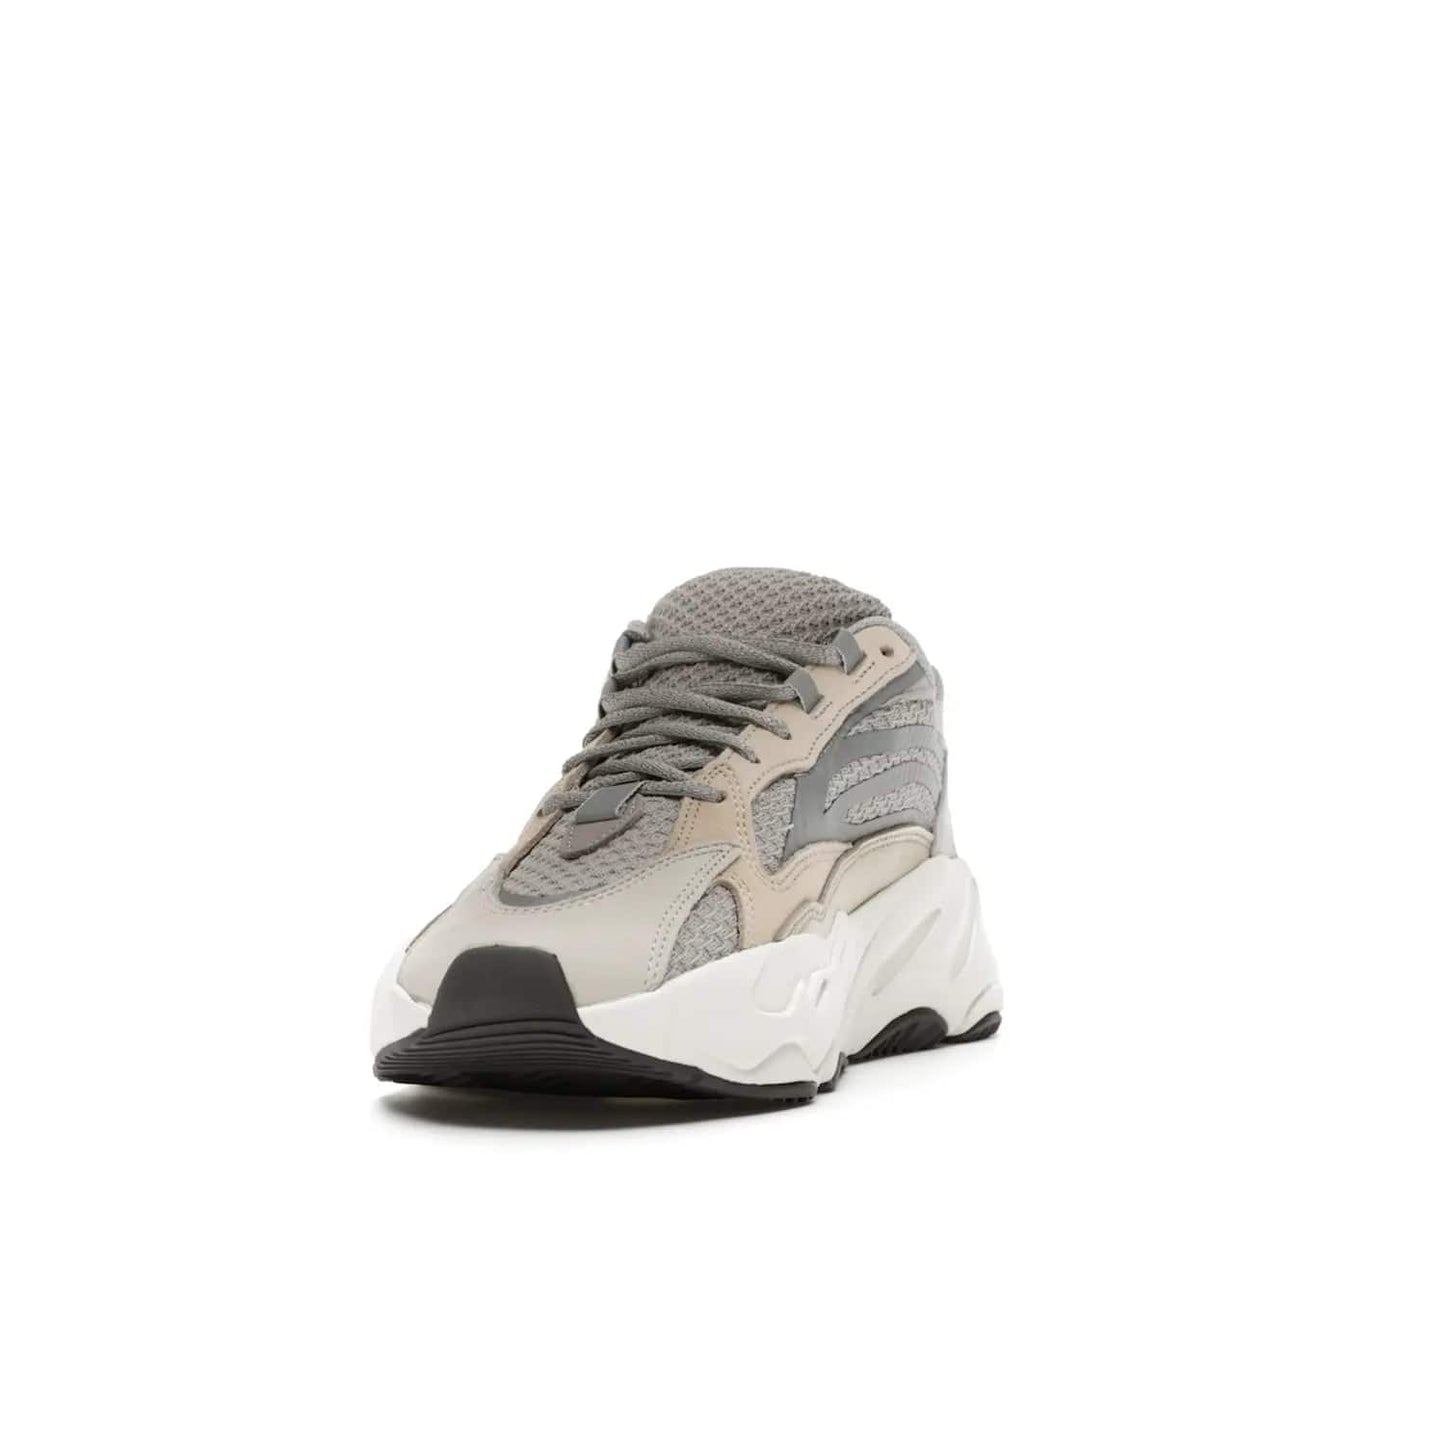 adidas Yeezy Boost 700 V2 Cream - Image 12 - Only at www.BallersClubKickz.com - Add style and luxury to your wardrobe with the adidas Yeezy 700 V2 Cream. Featuring a unique reflective upper, leather overlays, mesh underlays and the signature BOOST midsole, this silhouette is perfect for any stylish wardrobe.